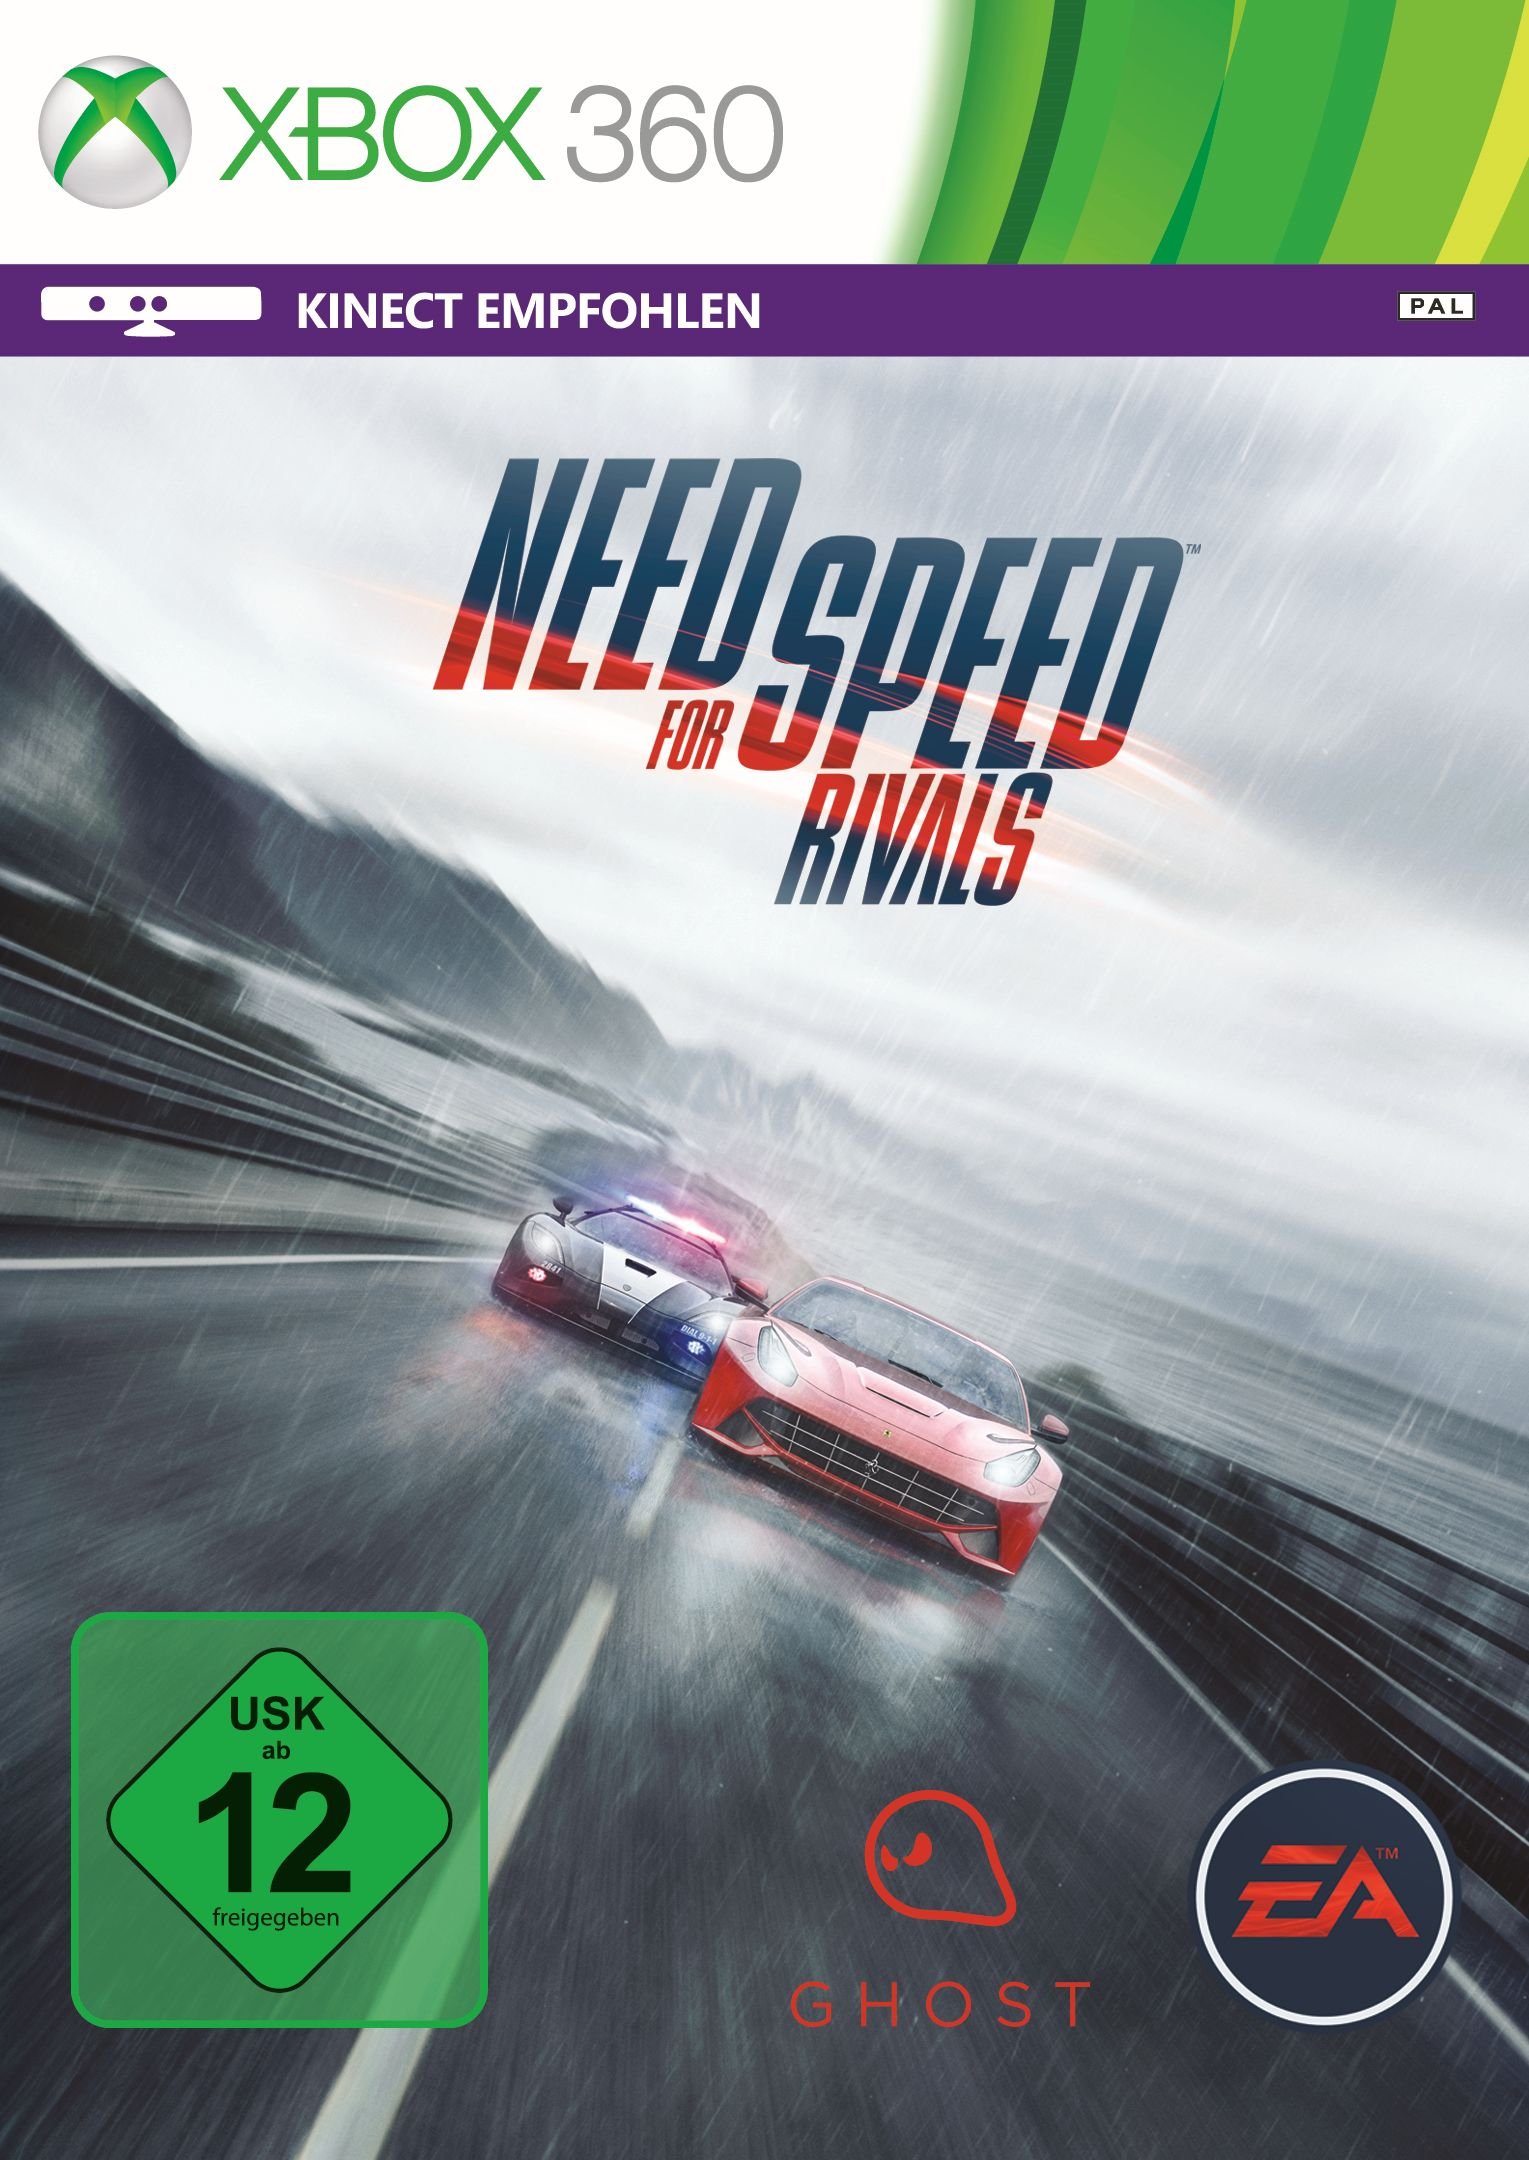 Need for Speed: Rivals - [Xbox 360]